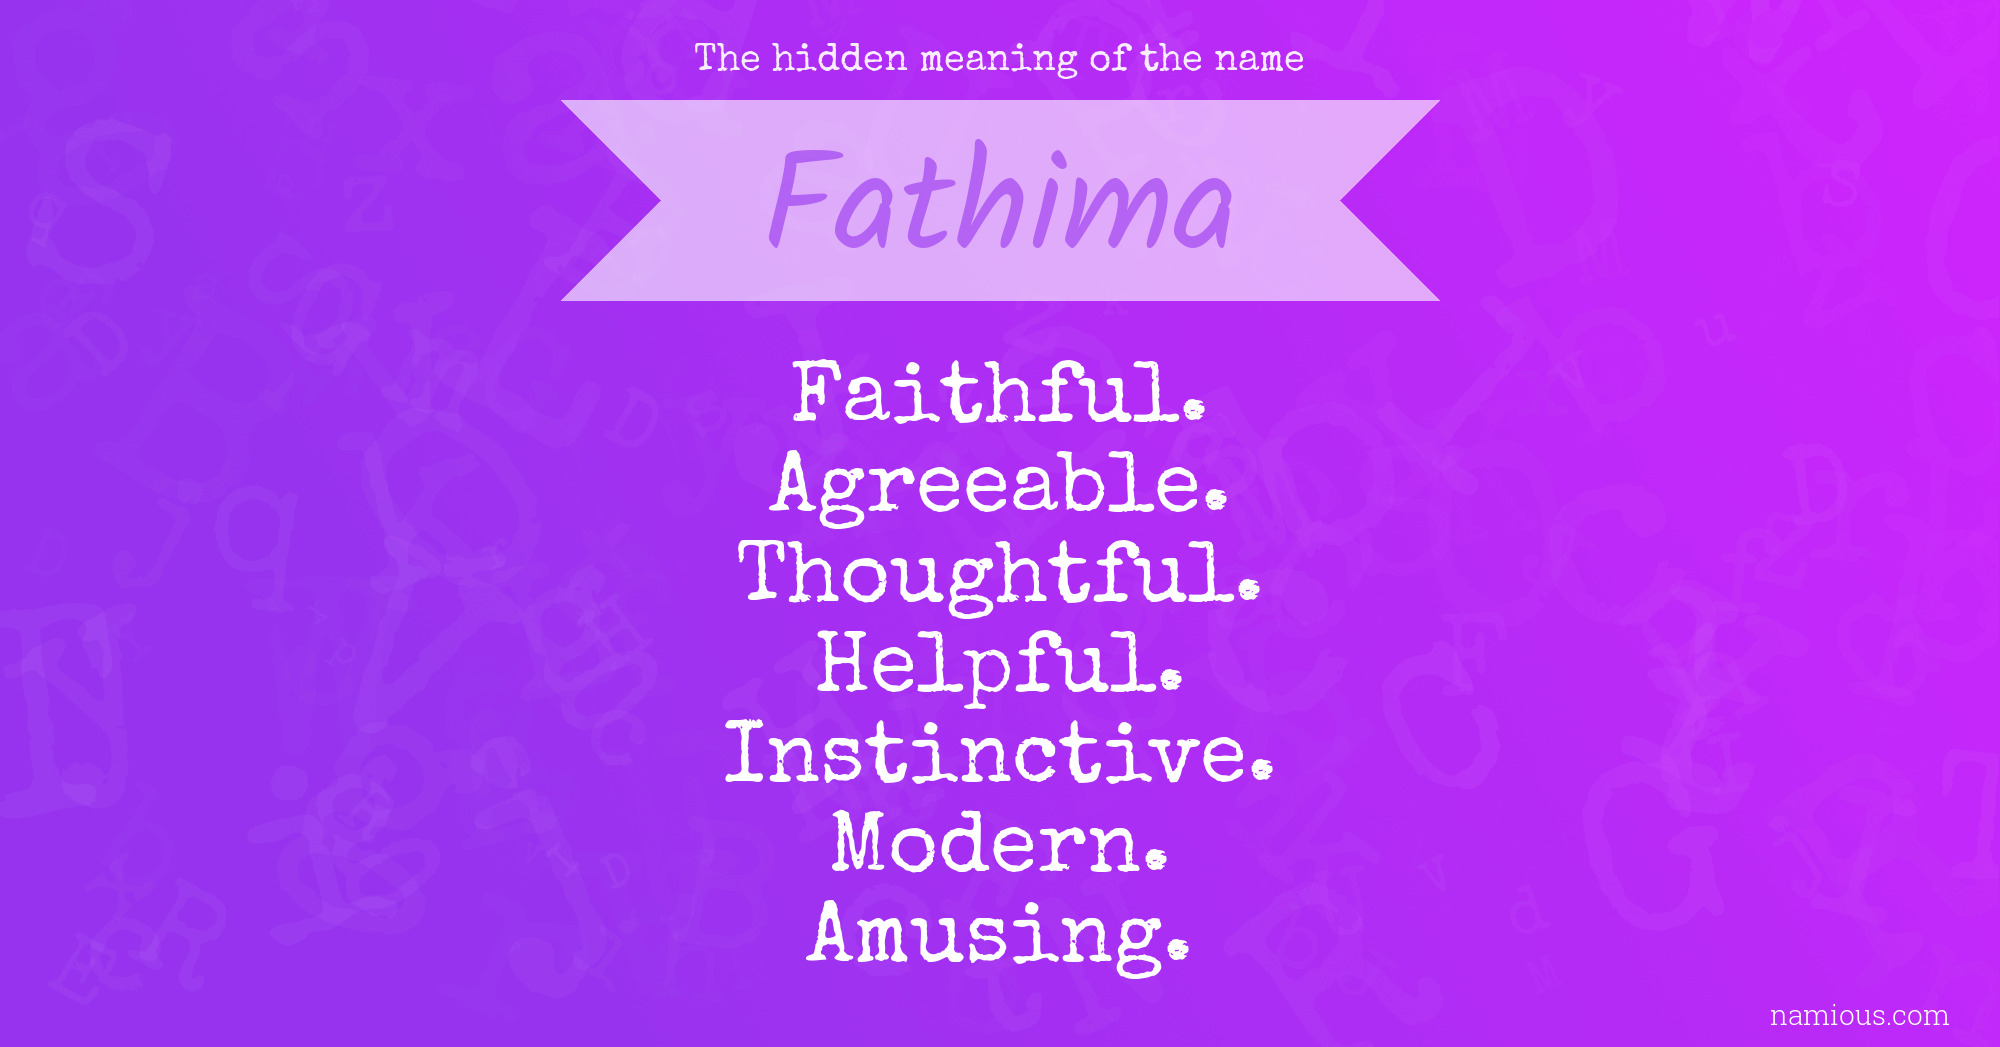 The hidden meaning of the name Fathima